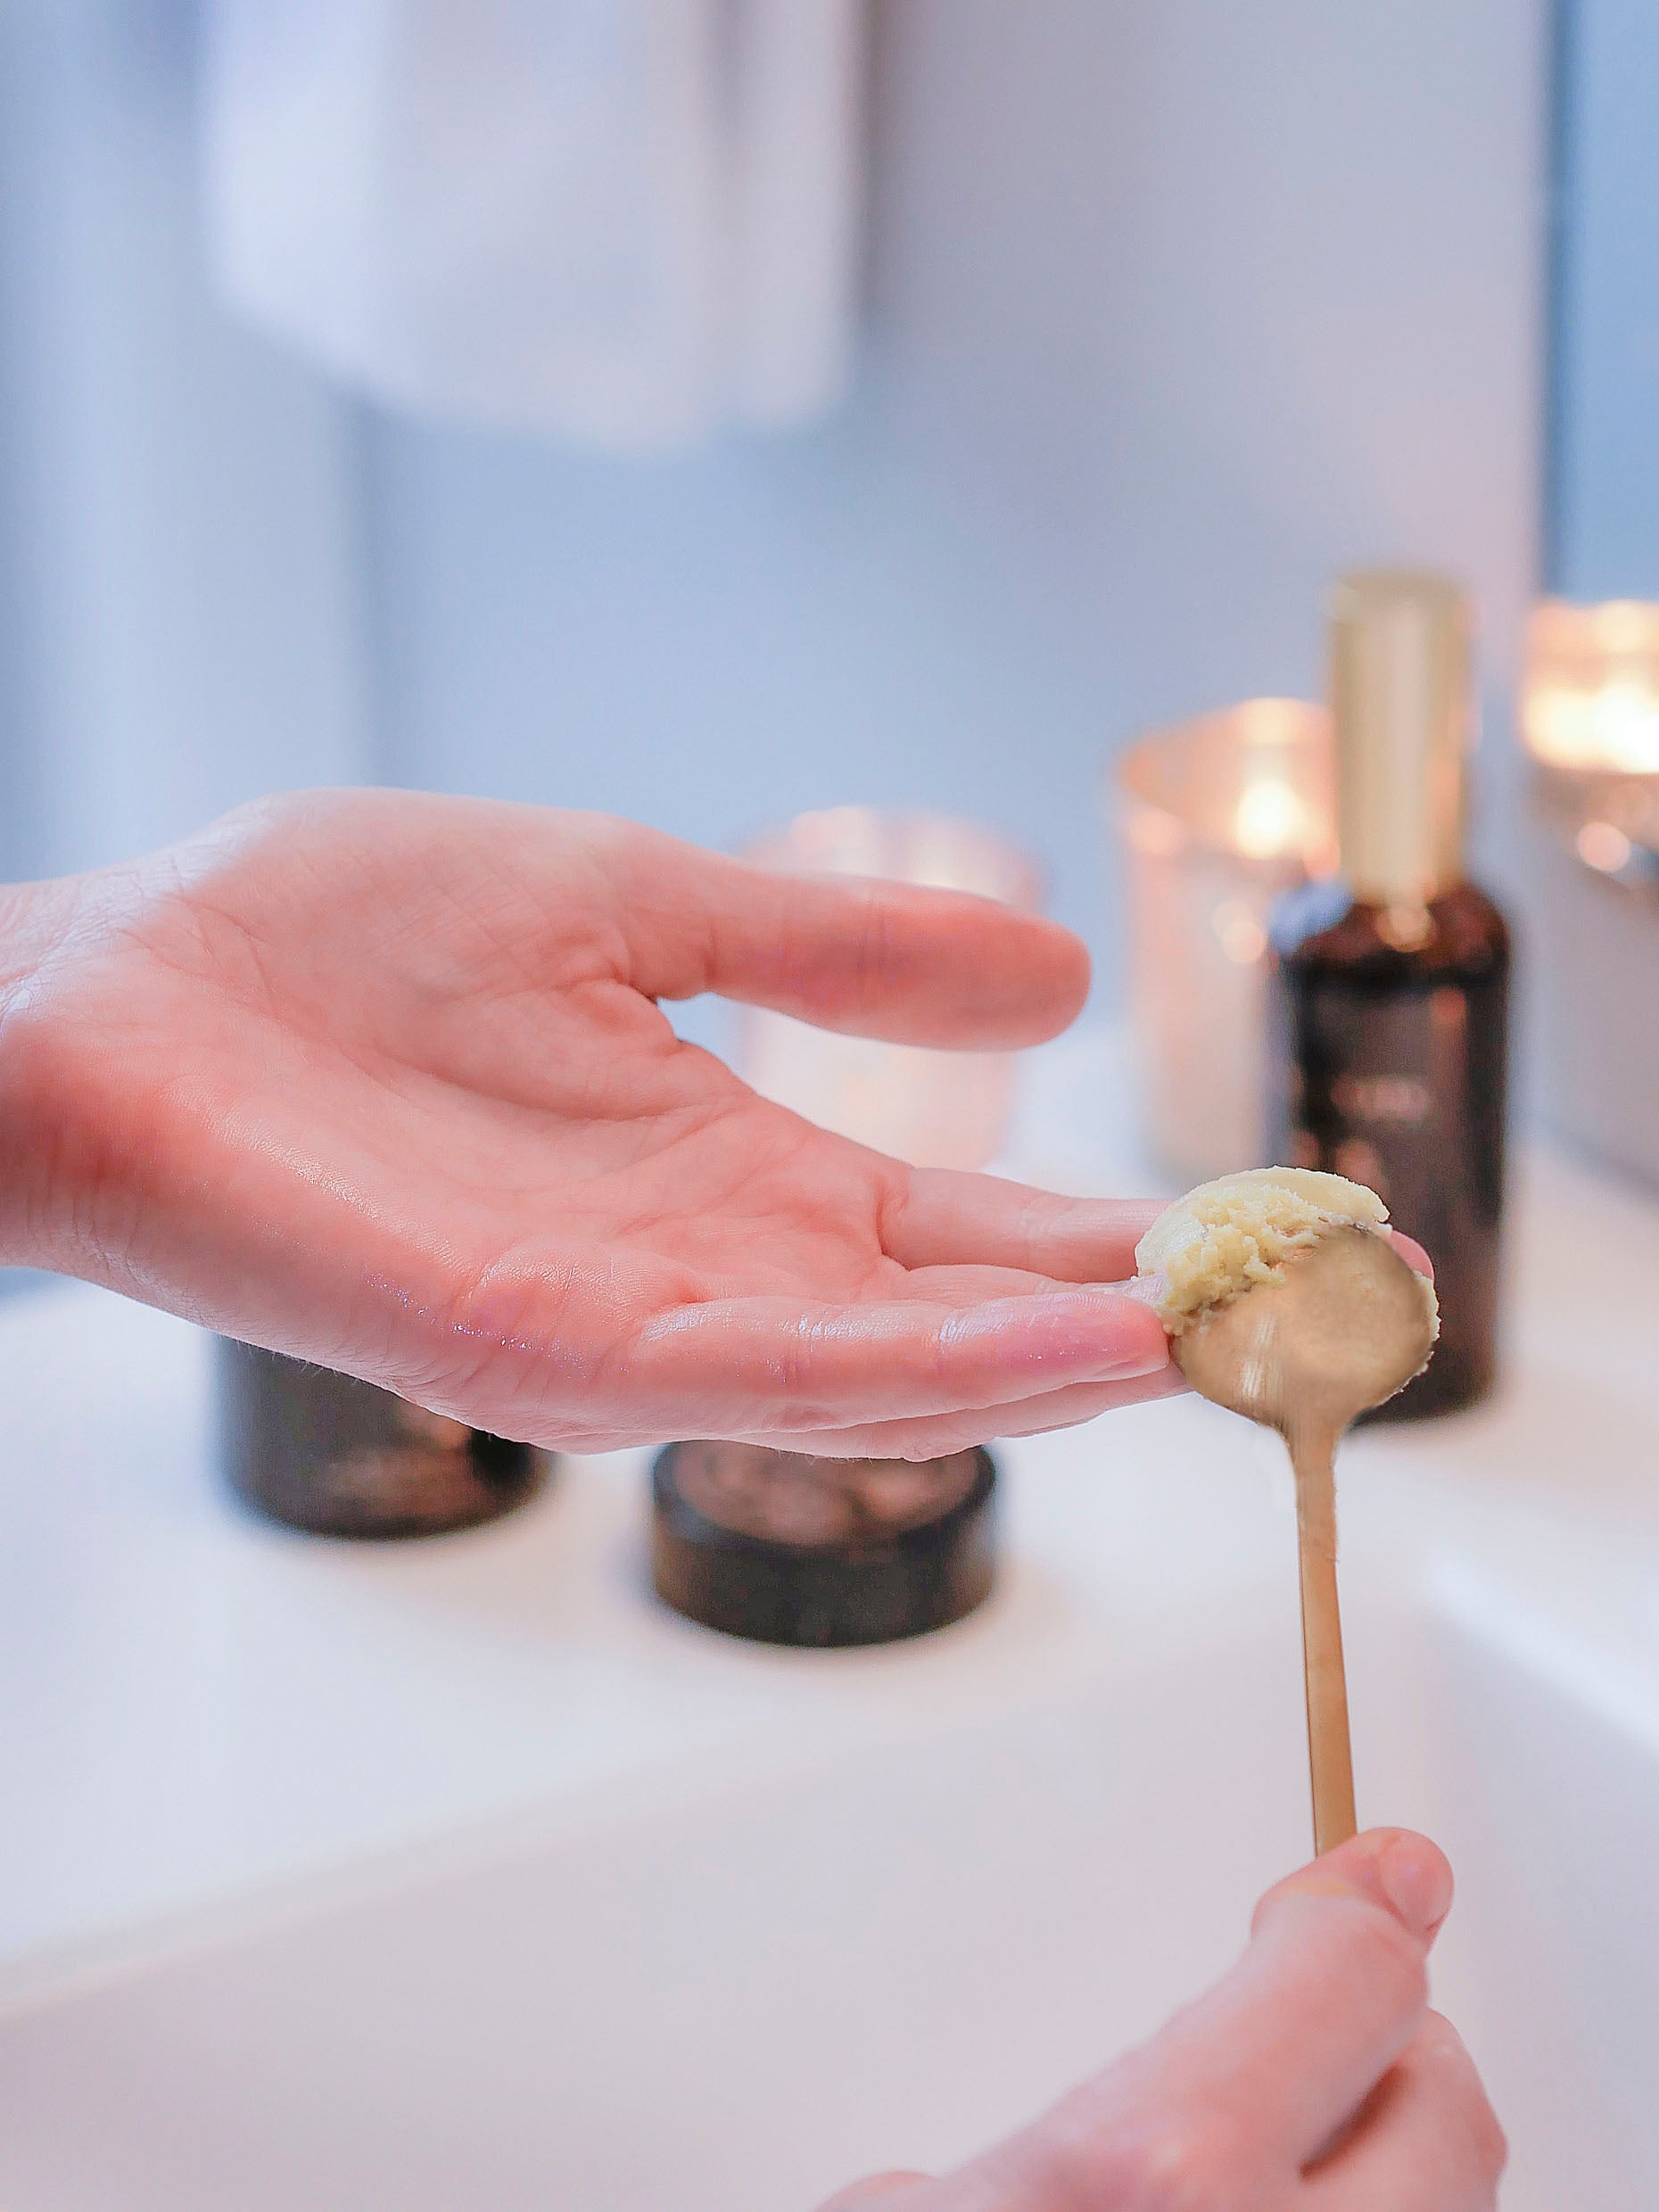 A woman scooping balm cleanser into the palm of her hand using a gold cleaning balm spoon.